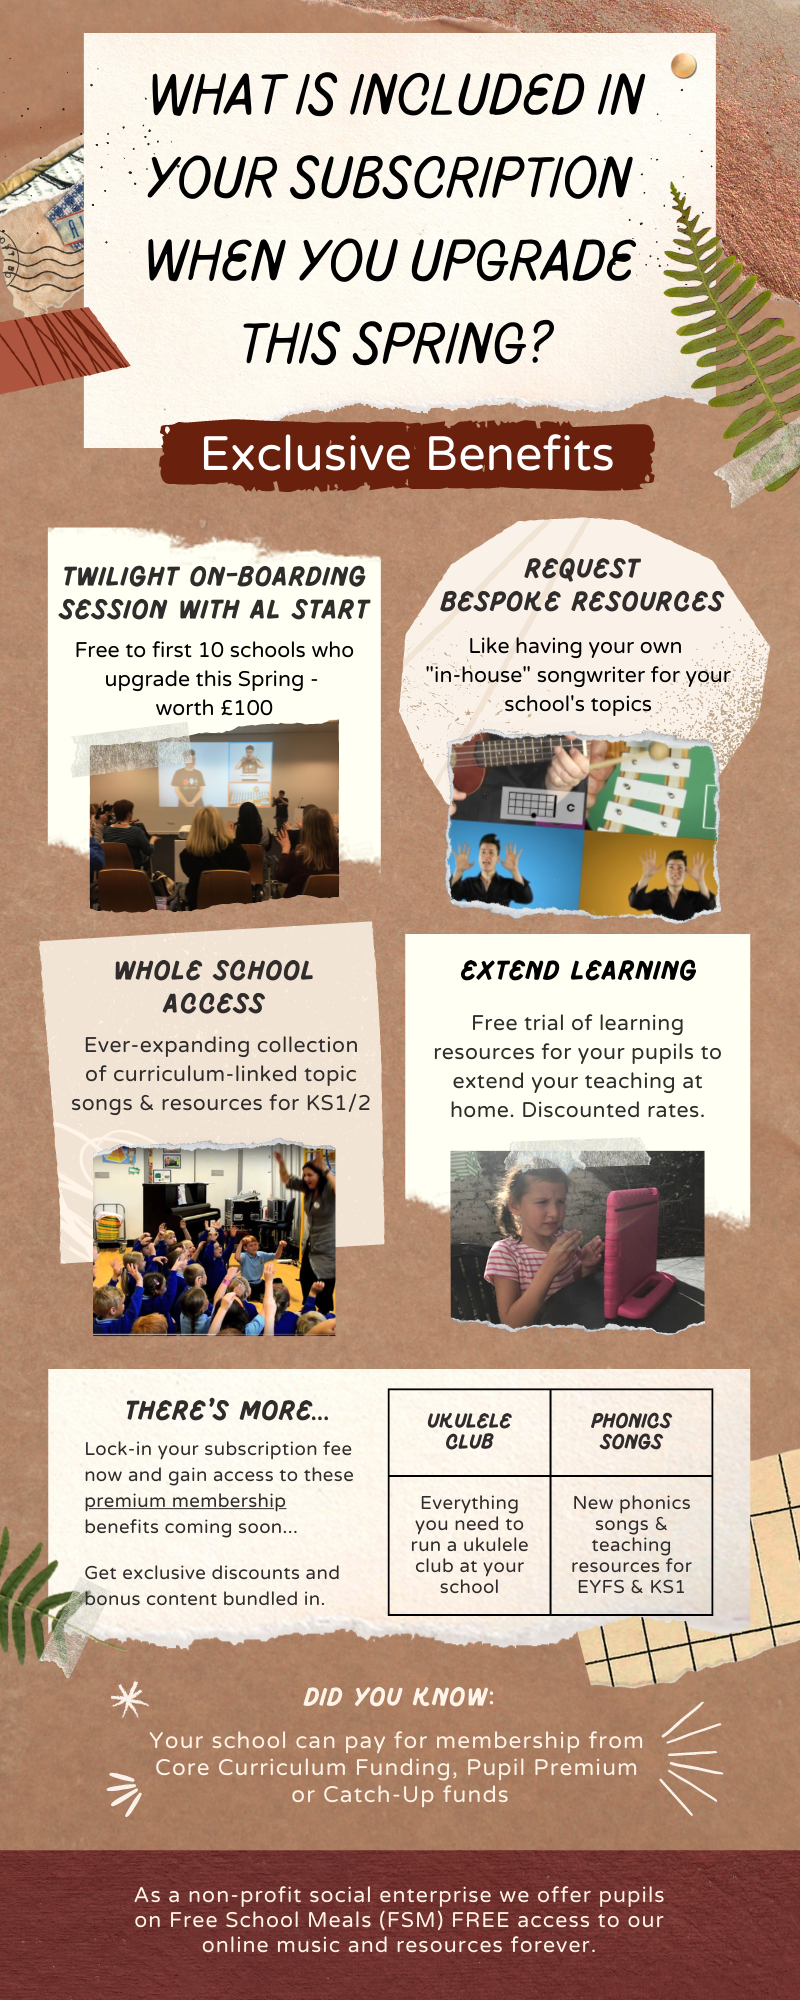 List of benefits with infographic for school when they upgrade to the Go Kid School Membership